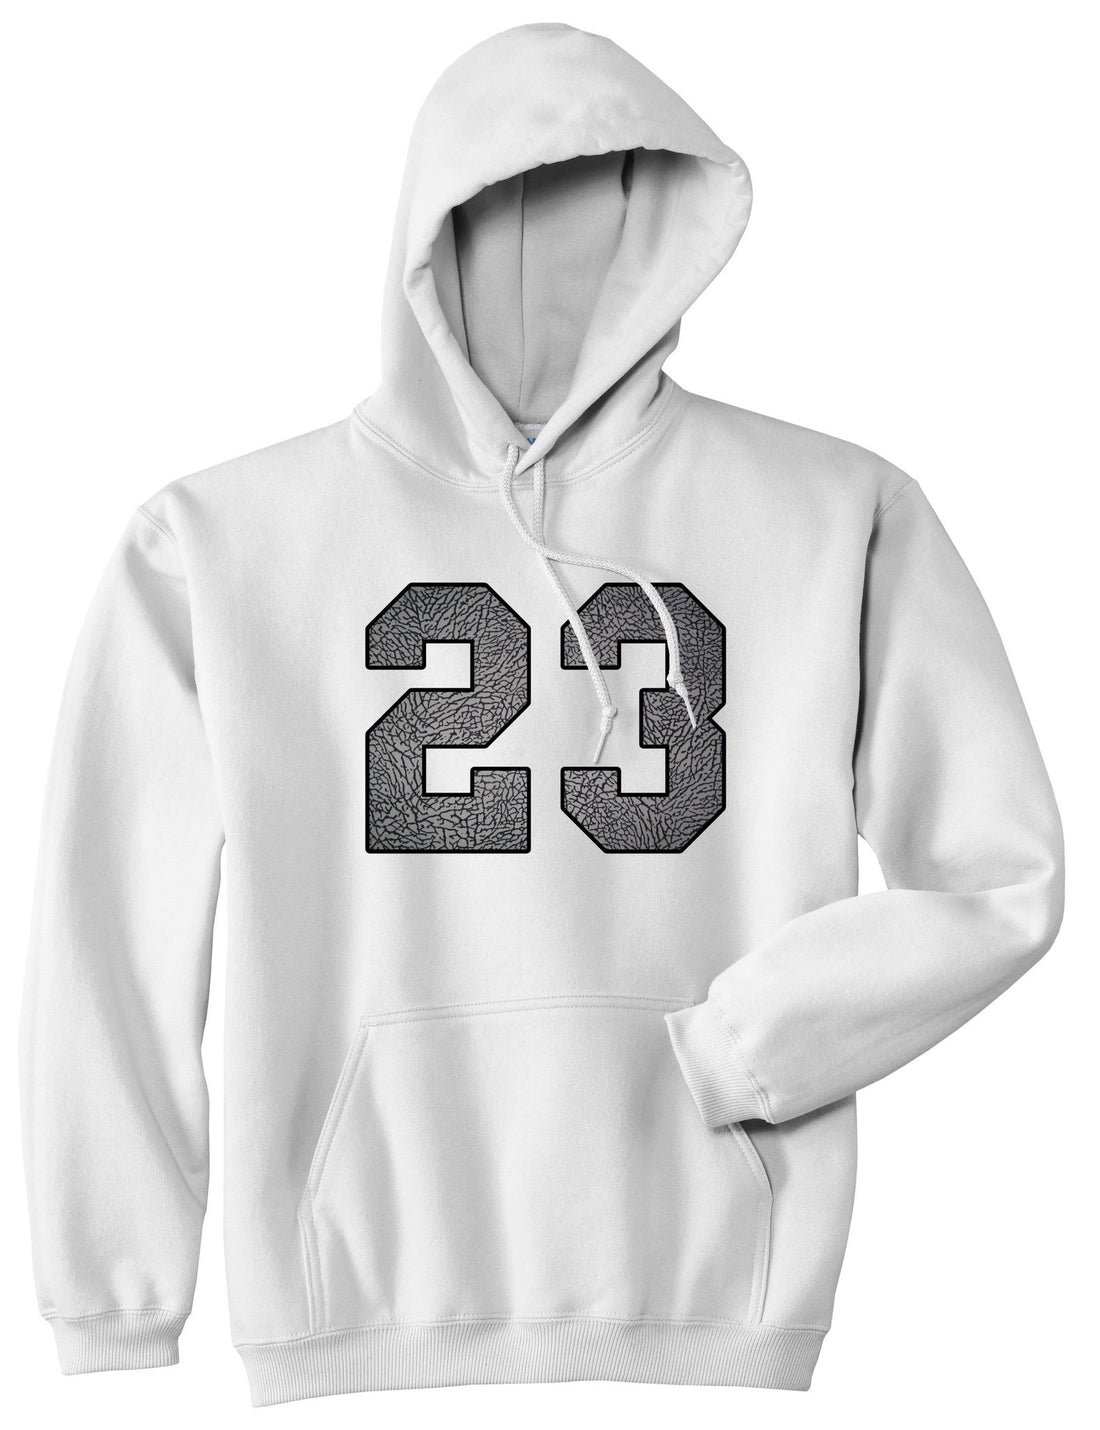 23 Cement Jersey Pullover Hoodie in White By Kings Of NY